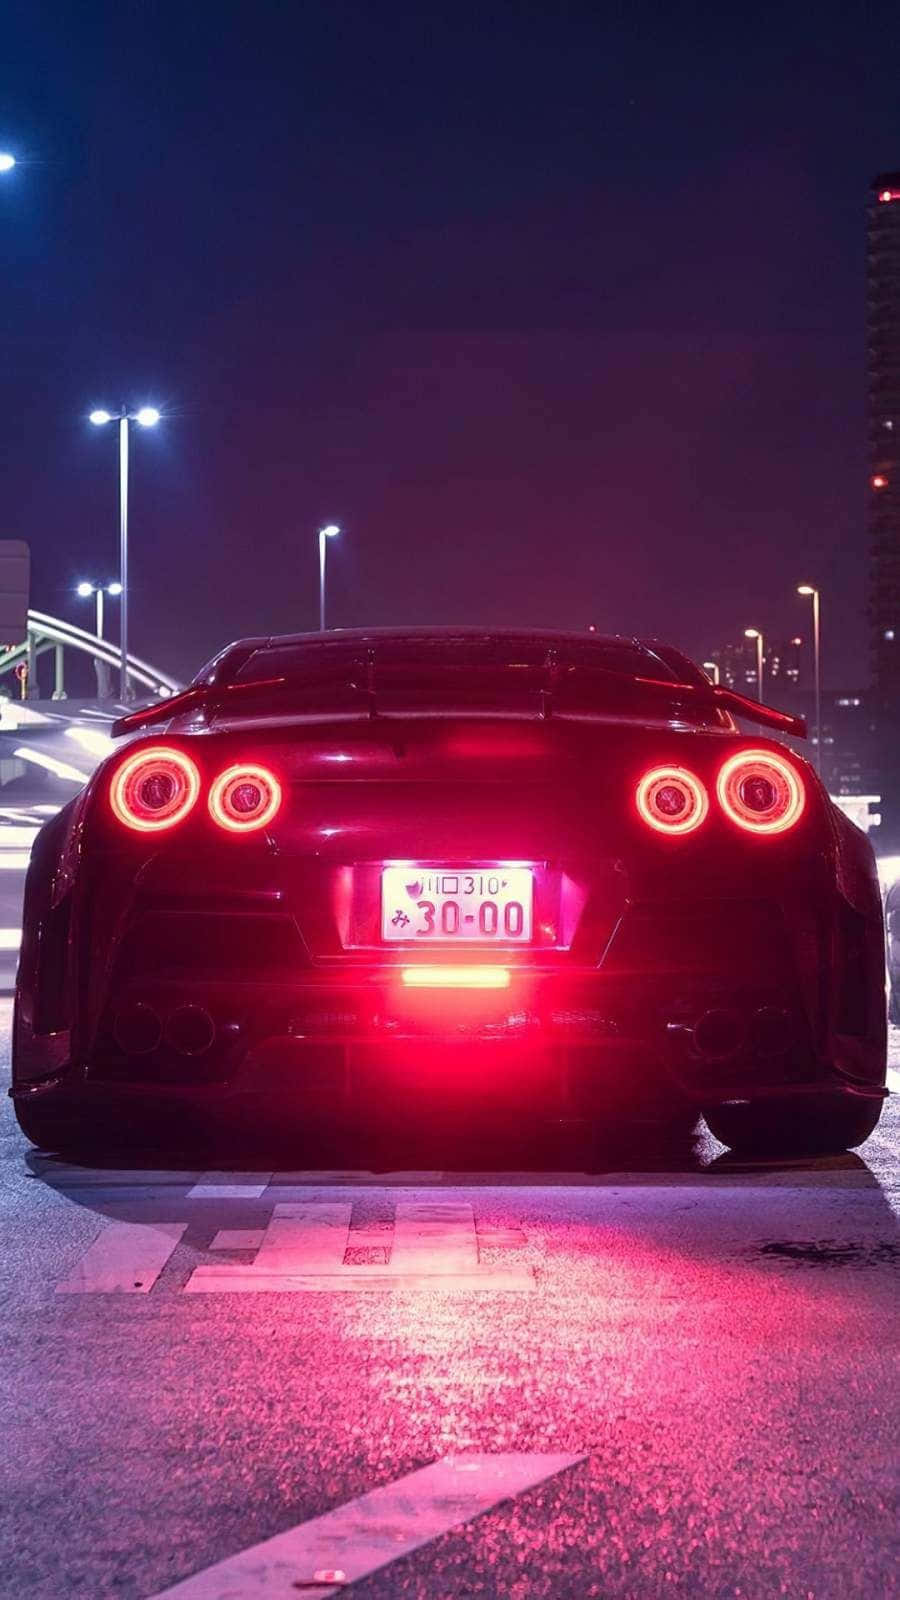 Get behind the wheel with the sleek and powerful GTR Iphone Wallpaper